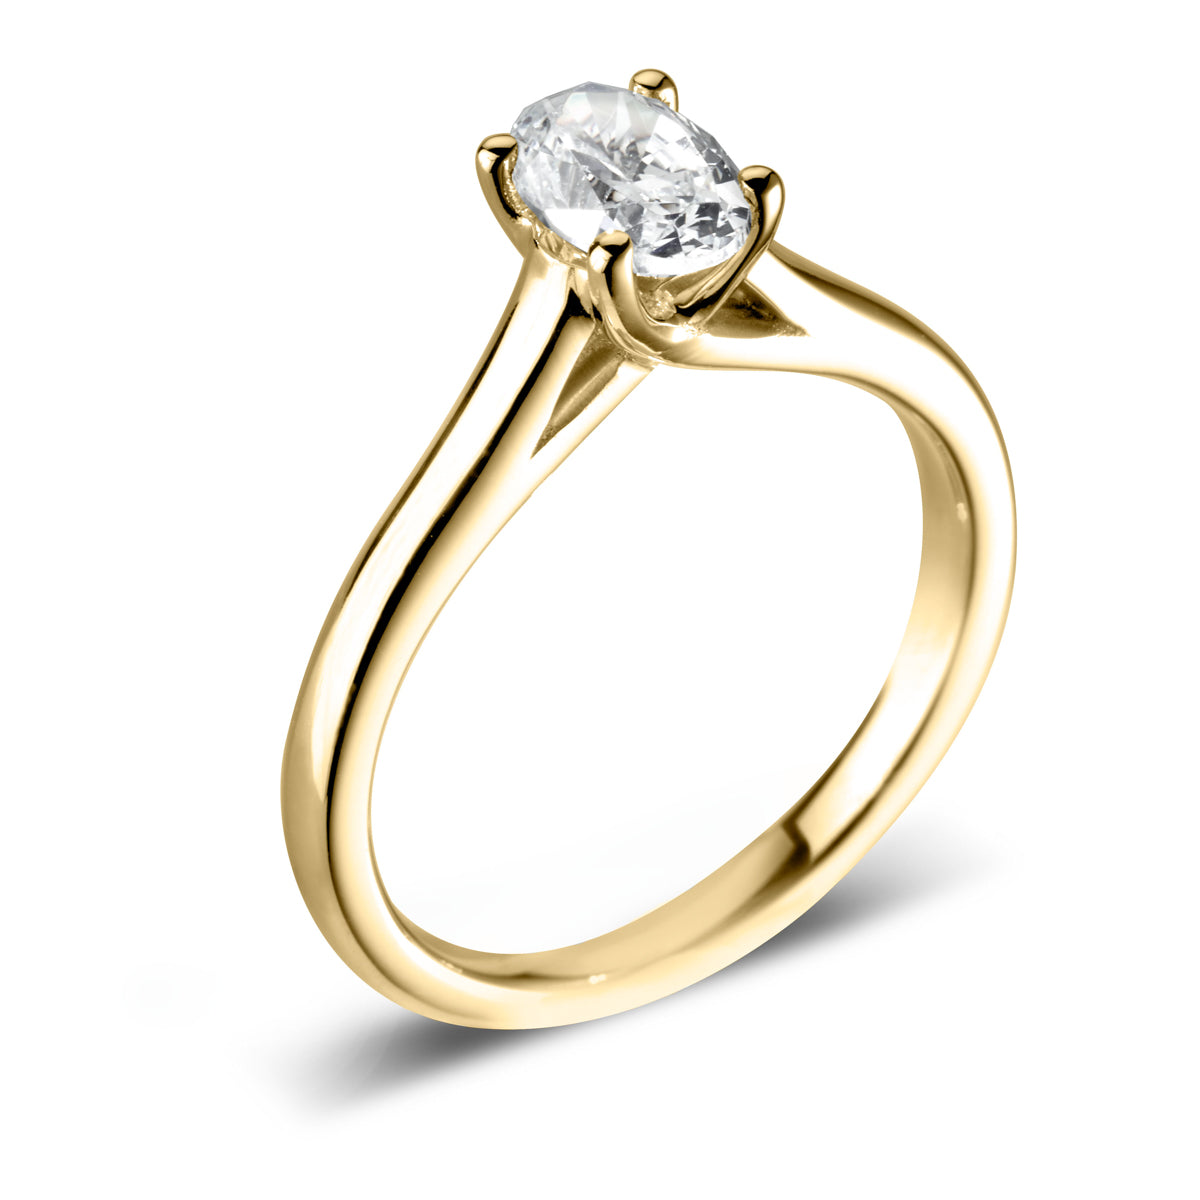 Oval cut 4 claw crossover diamond ring